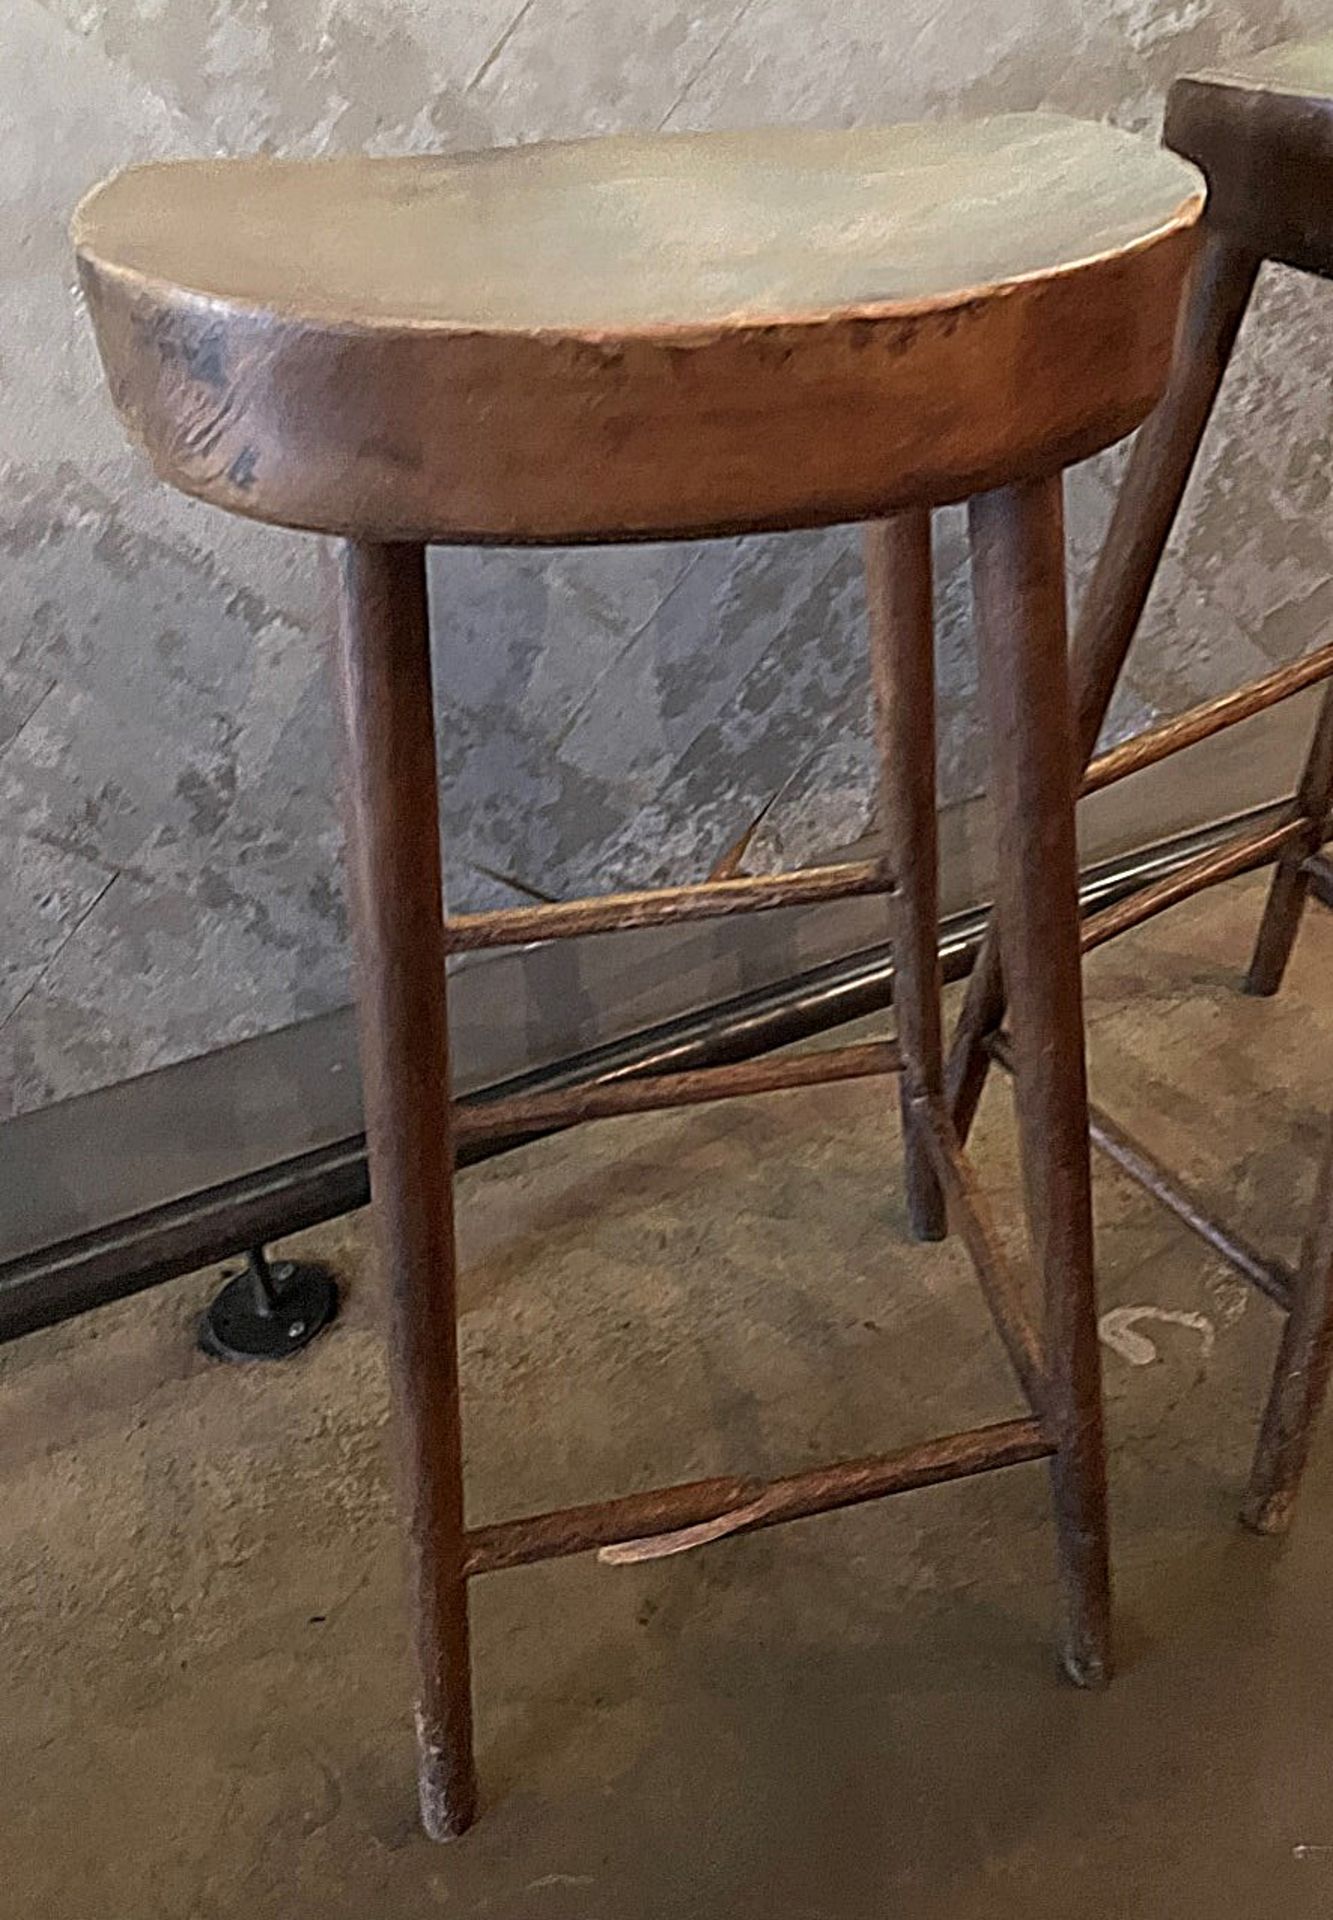 4 x Rustic-style Solid Wooden Bistro Bar Stools With Carved Seats - Ref: MAN100 - CL677 - - Image 2 of 4